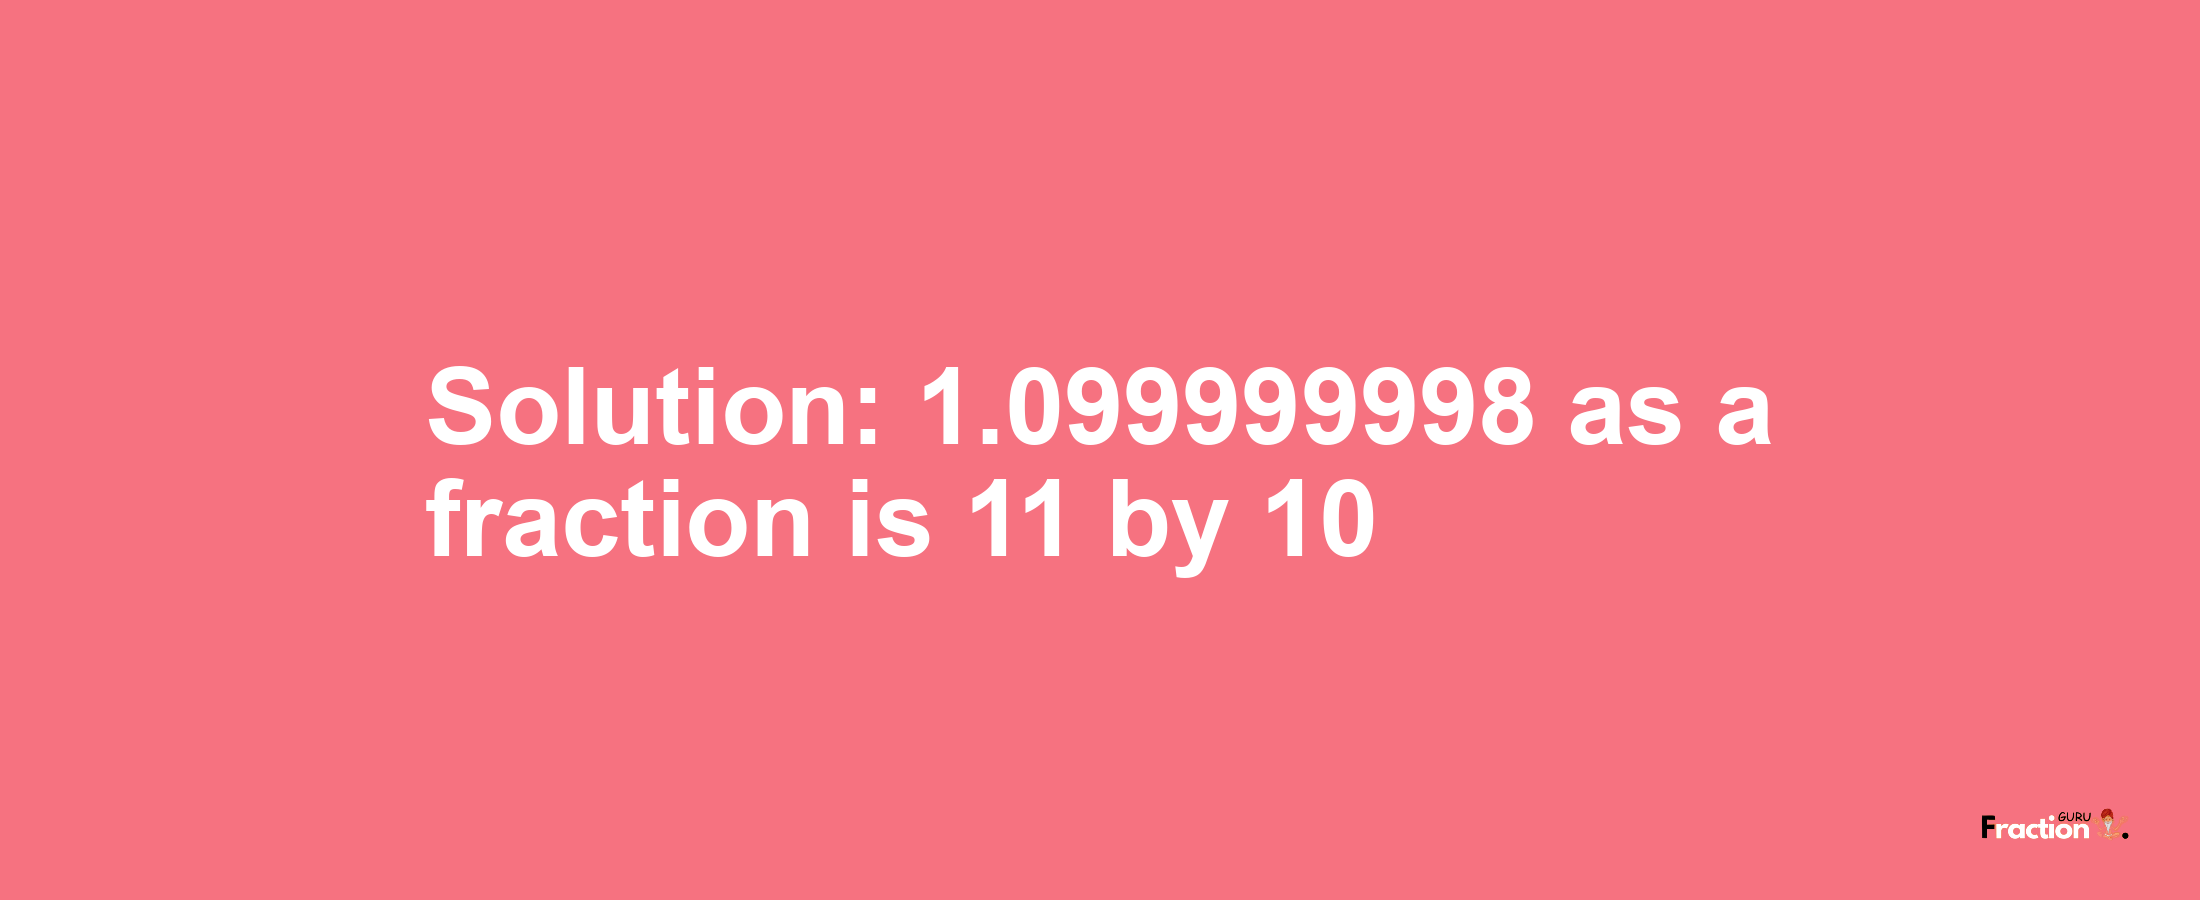 Solution:1.099999998 as a fraction is 11/10